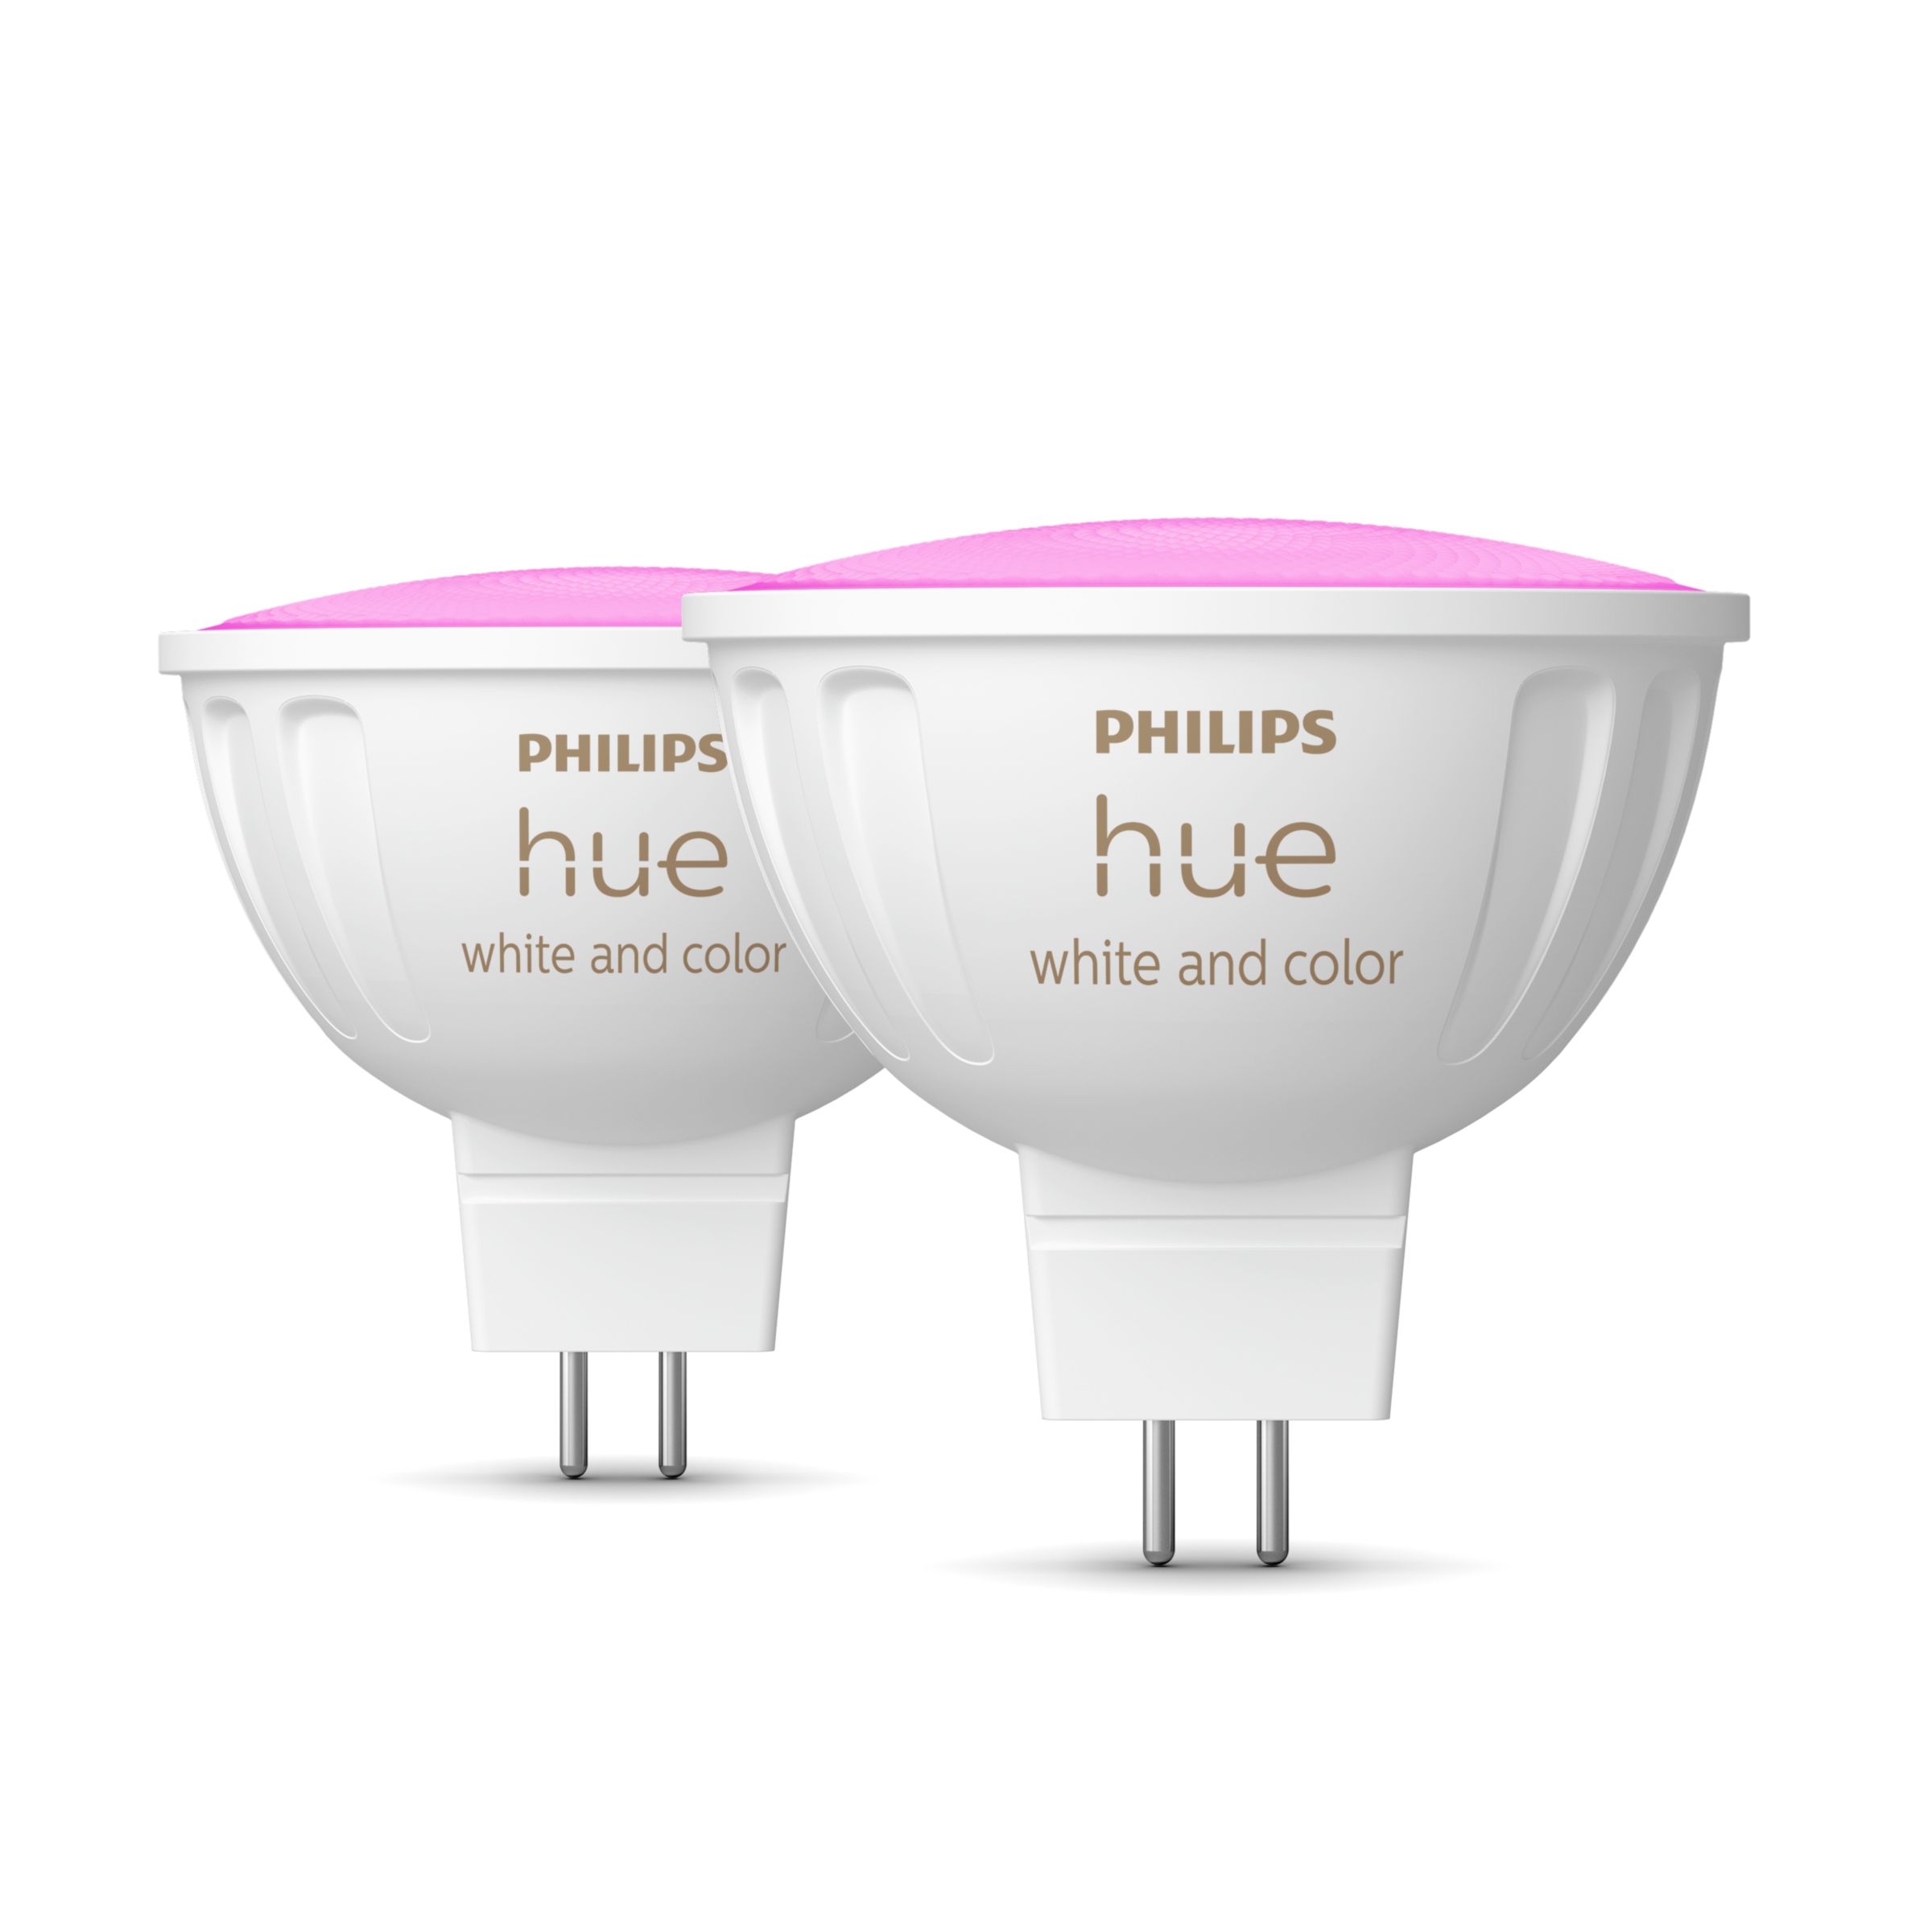 Compatible transformers for the MR16 lamps from Philips Hue 